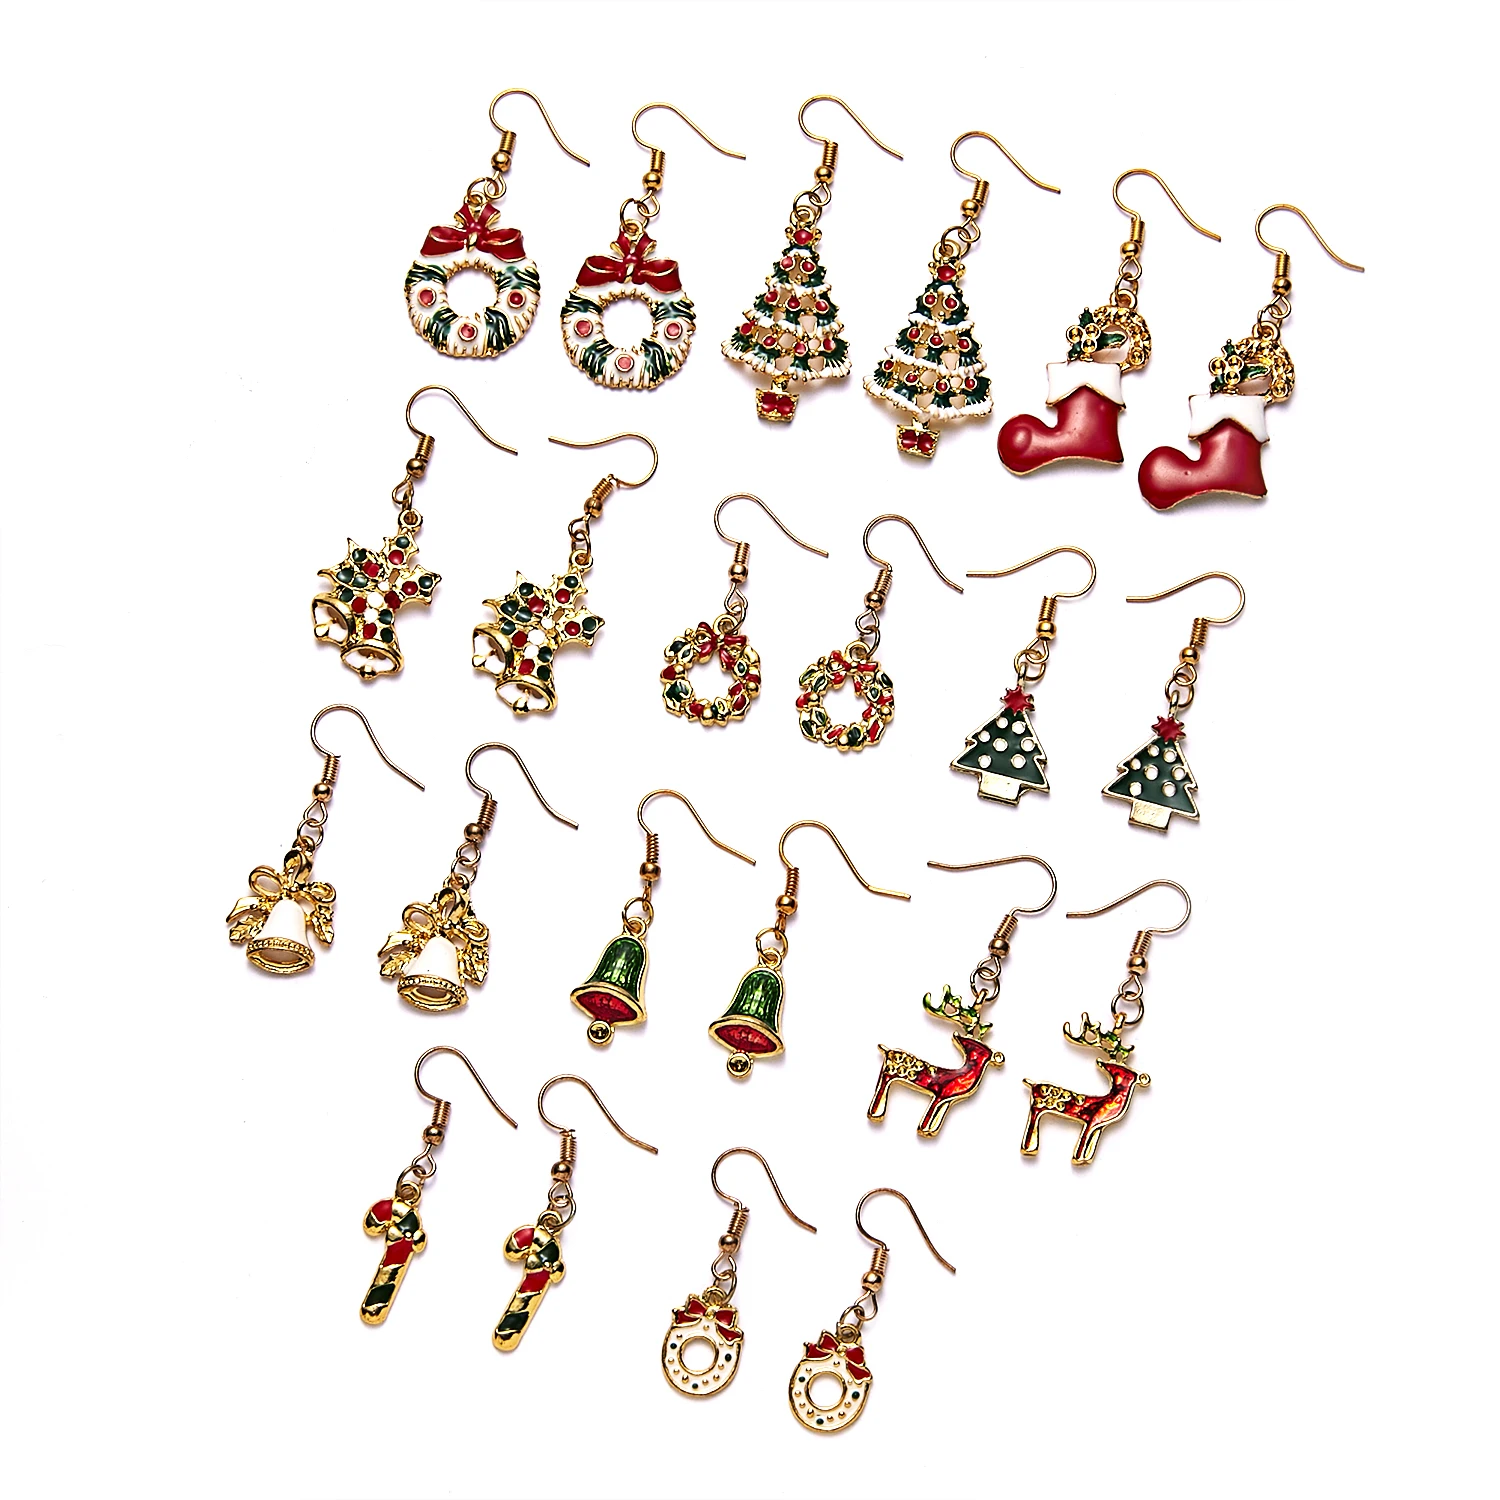 

Alloy Christmas Tree Wreath Socks Printing Pendant Drop Earrings For Women Ear Hook 2021 New Christmas Jewelry Gift, Picture shows